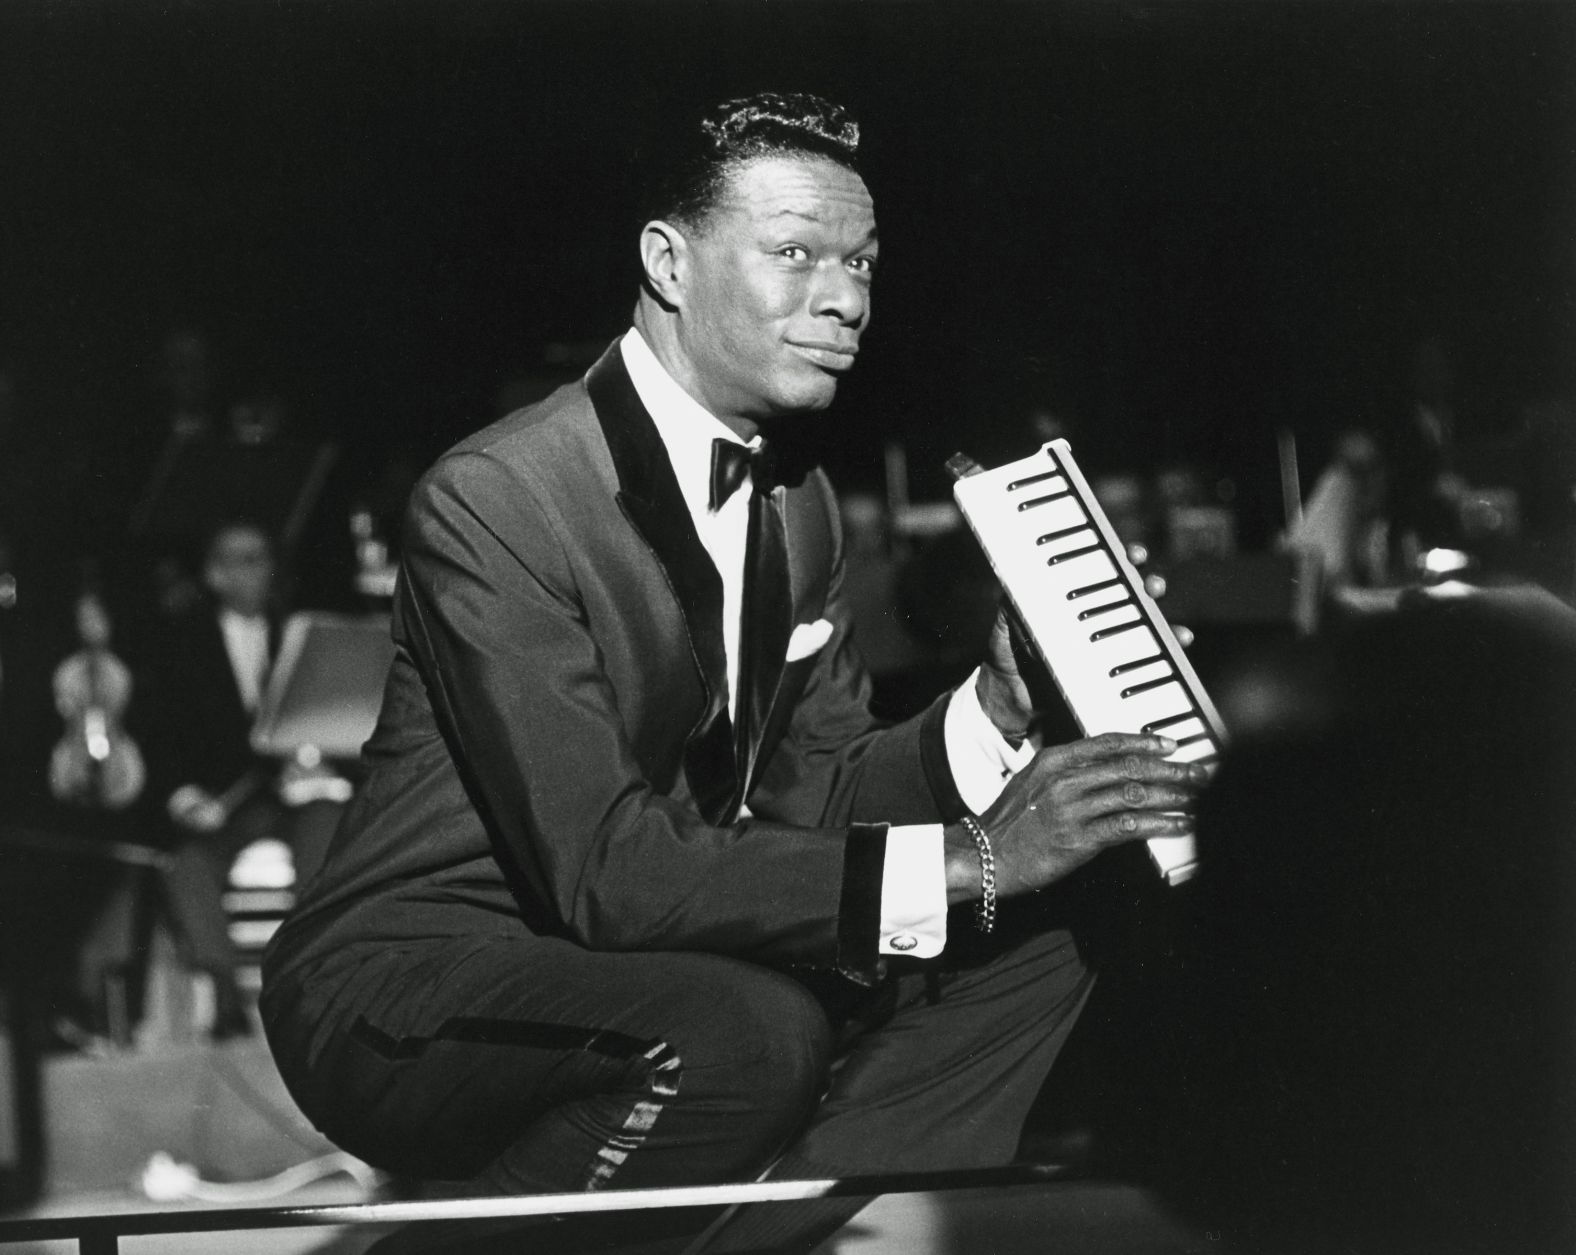 Nat King Cole performs at the Sands in 1962.